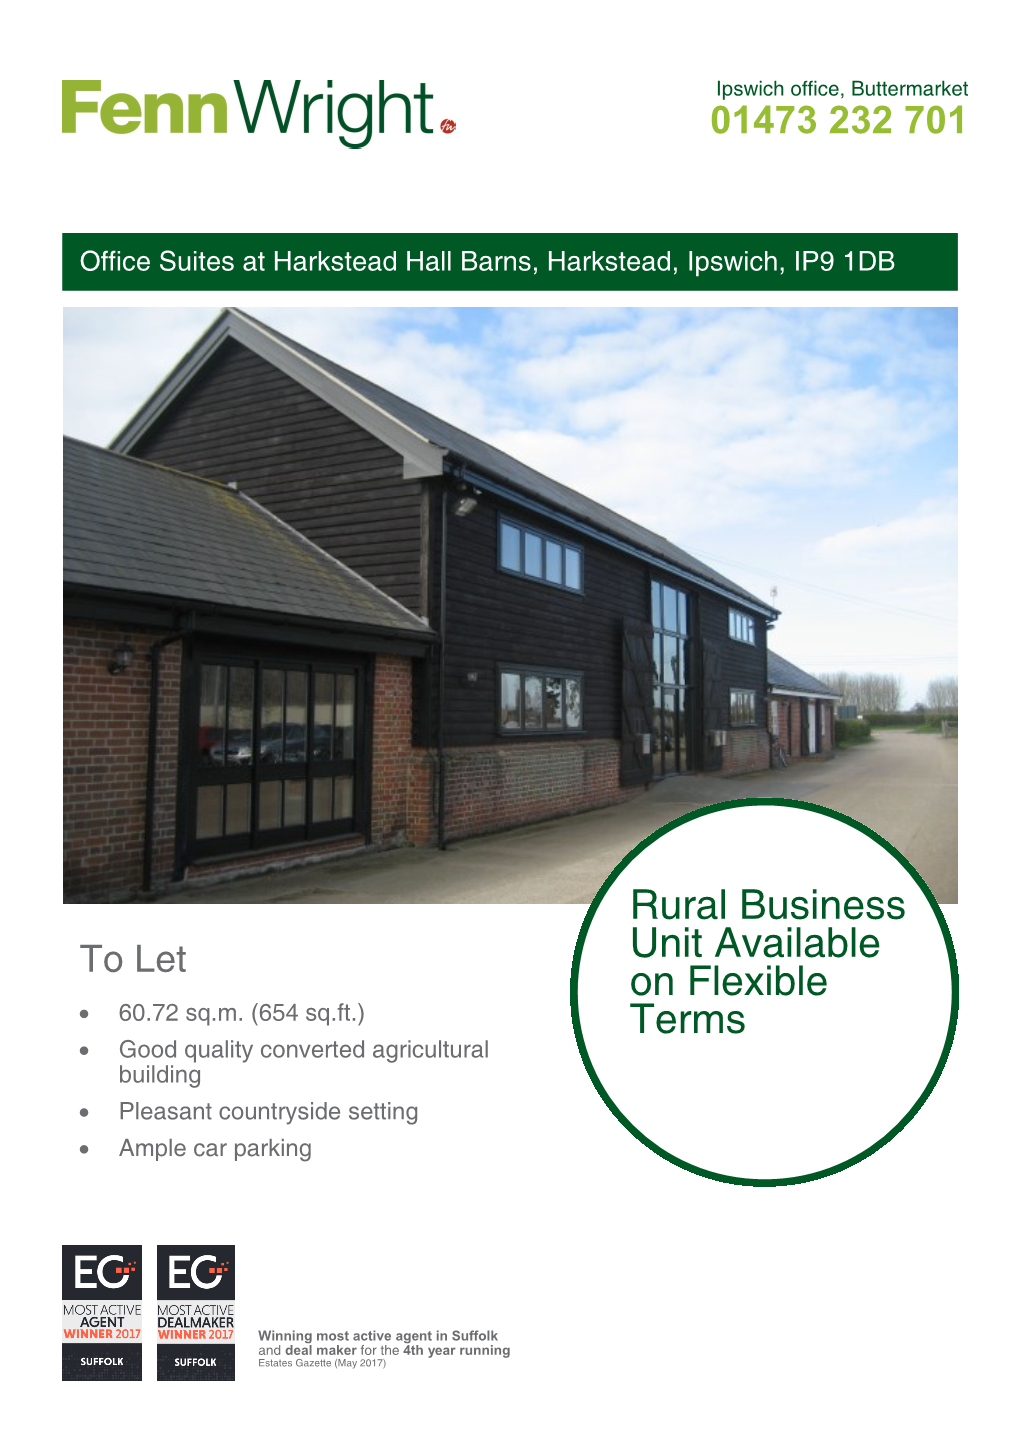 Rural Business Unit Available on Flexible Terms